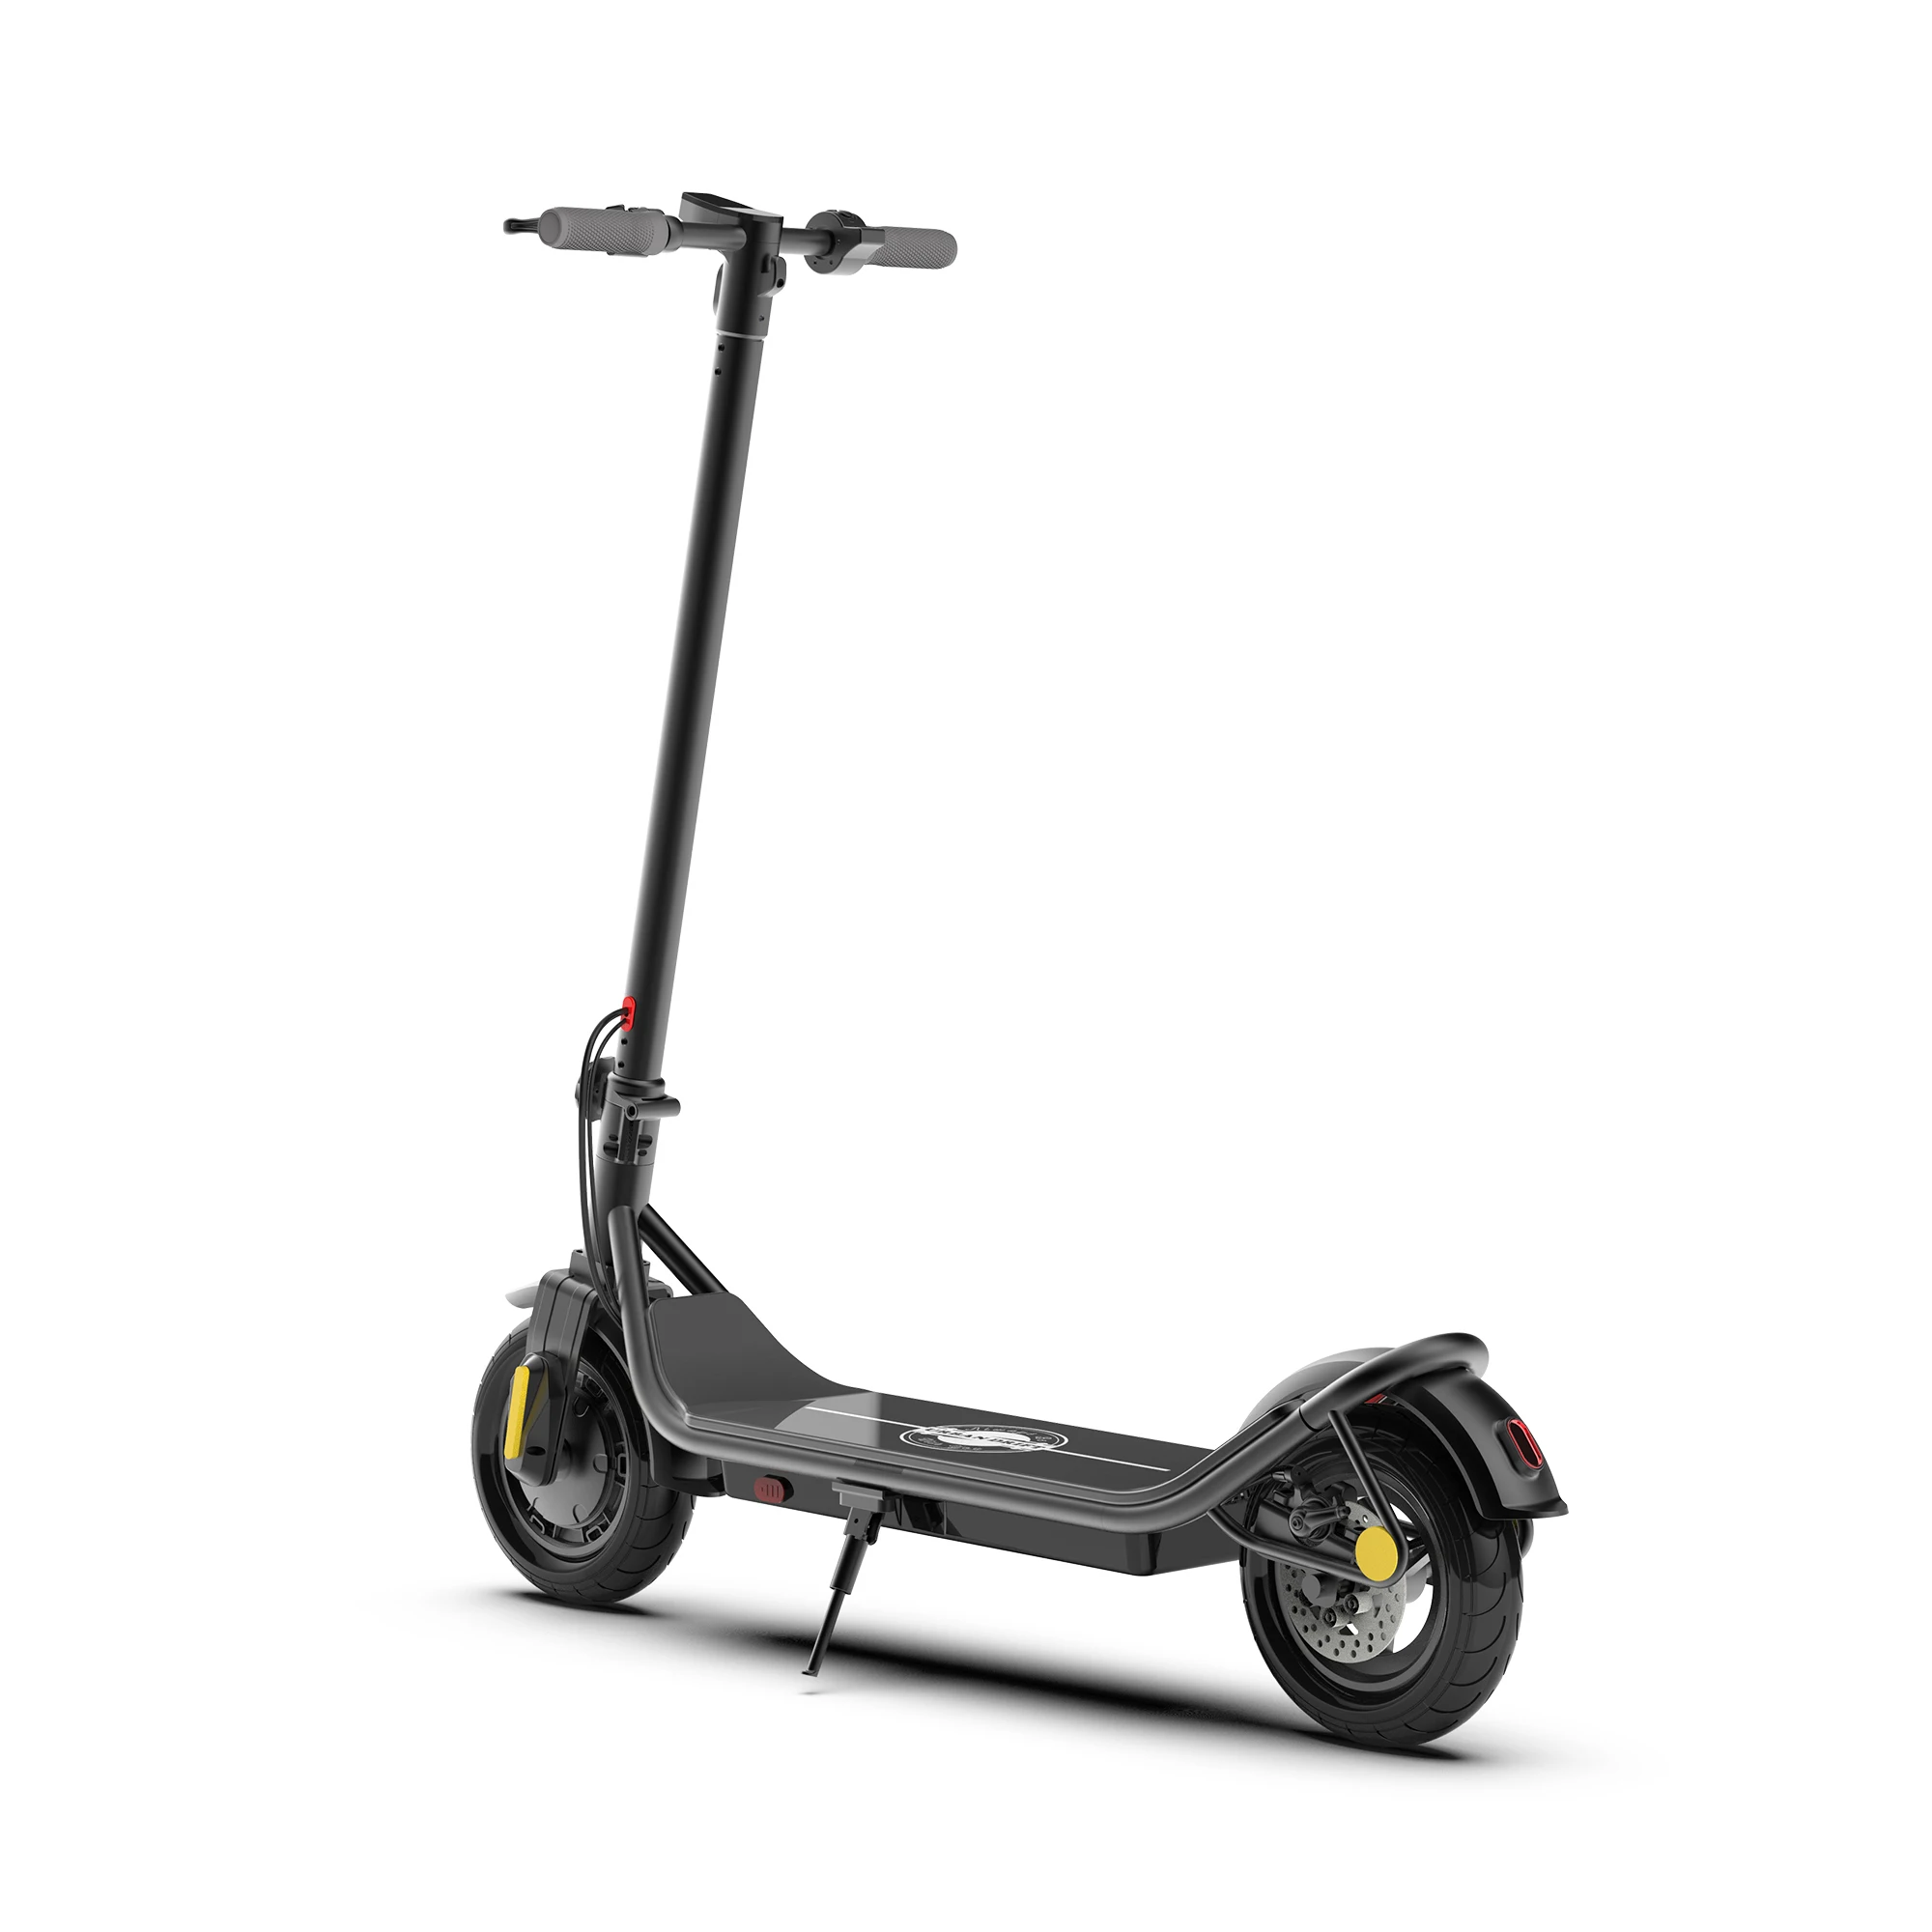 

DDP EU USA New Cheap Adult 45km/h offroad electro scooter foldable e roller mobility e-scooter Electric Scooter 500W with seat